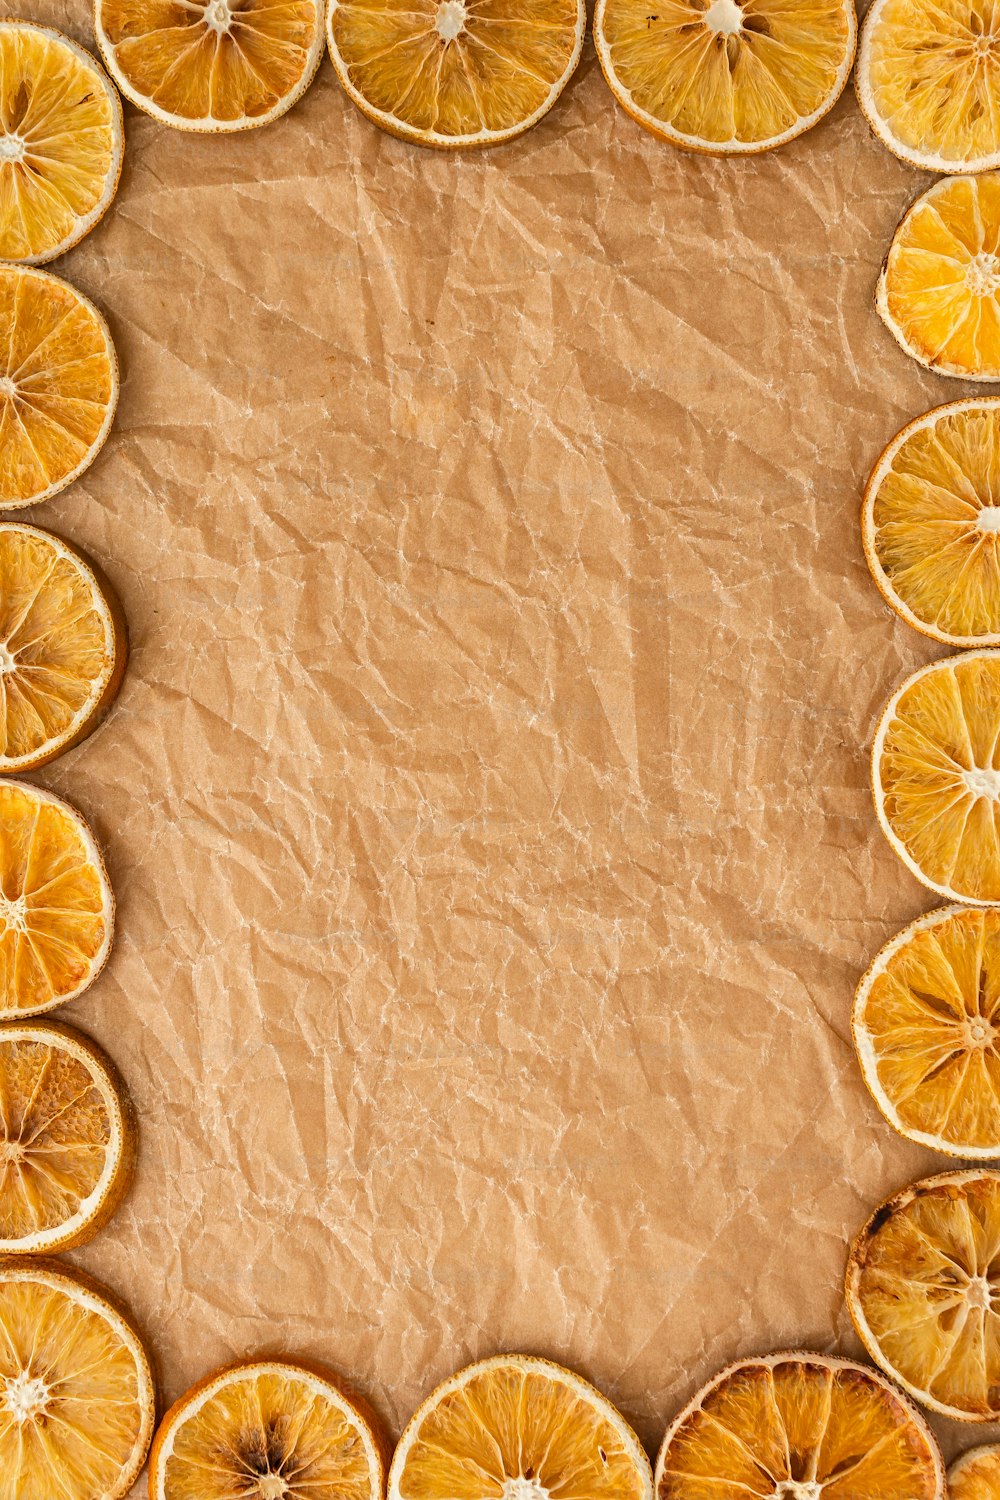 a group of sliced oranges arranged in a rectangle